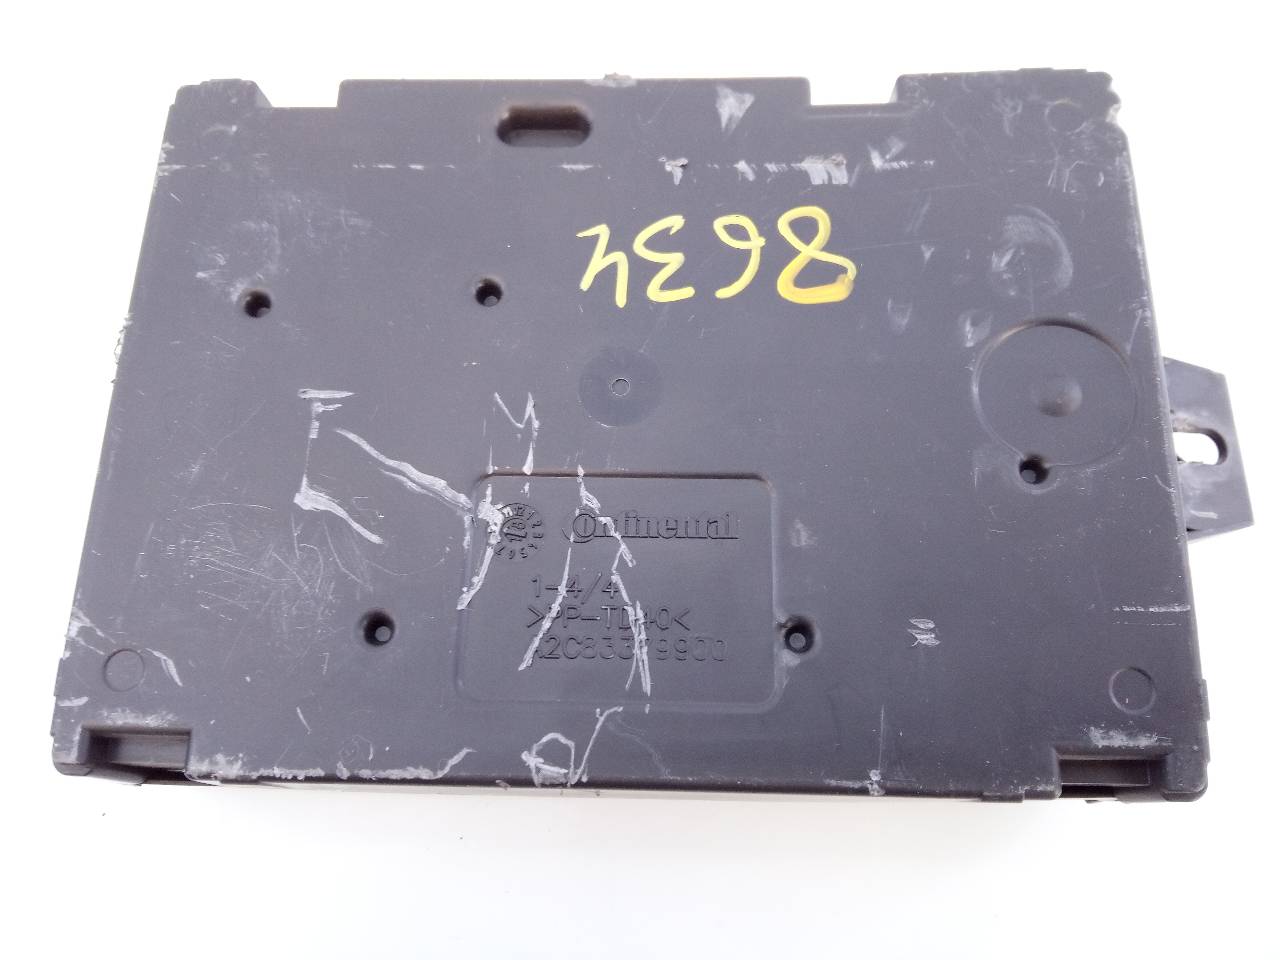 RENAULT Clio 4 generation (2012-2020) Other Control Units 284B40447R, A2C92226608, E2-A1-43-4 18716381